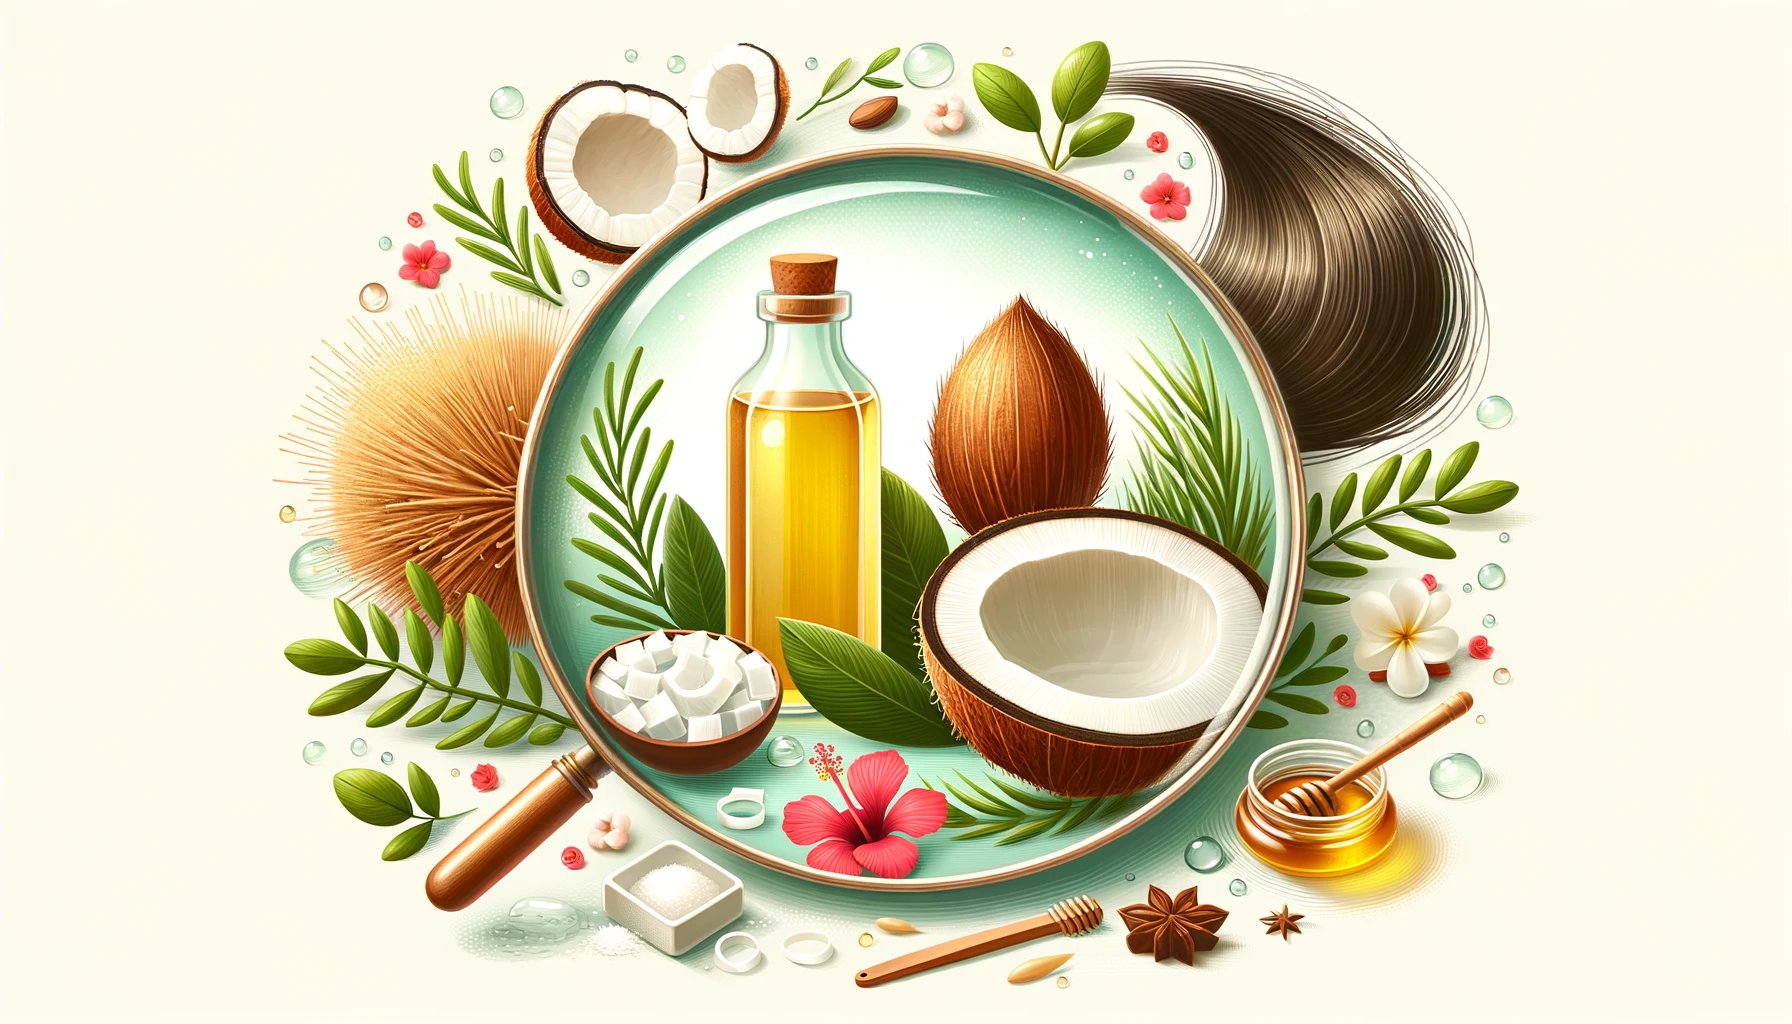 blog featured image for the post about coconut oil for hair growth